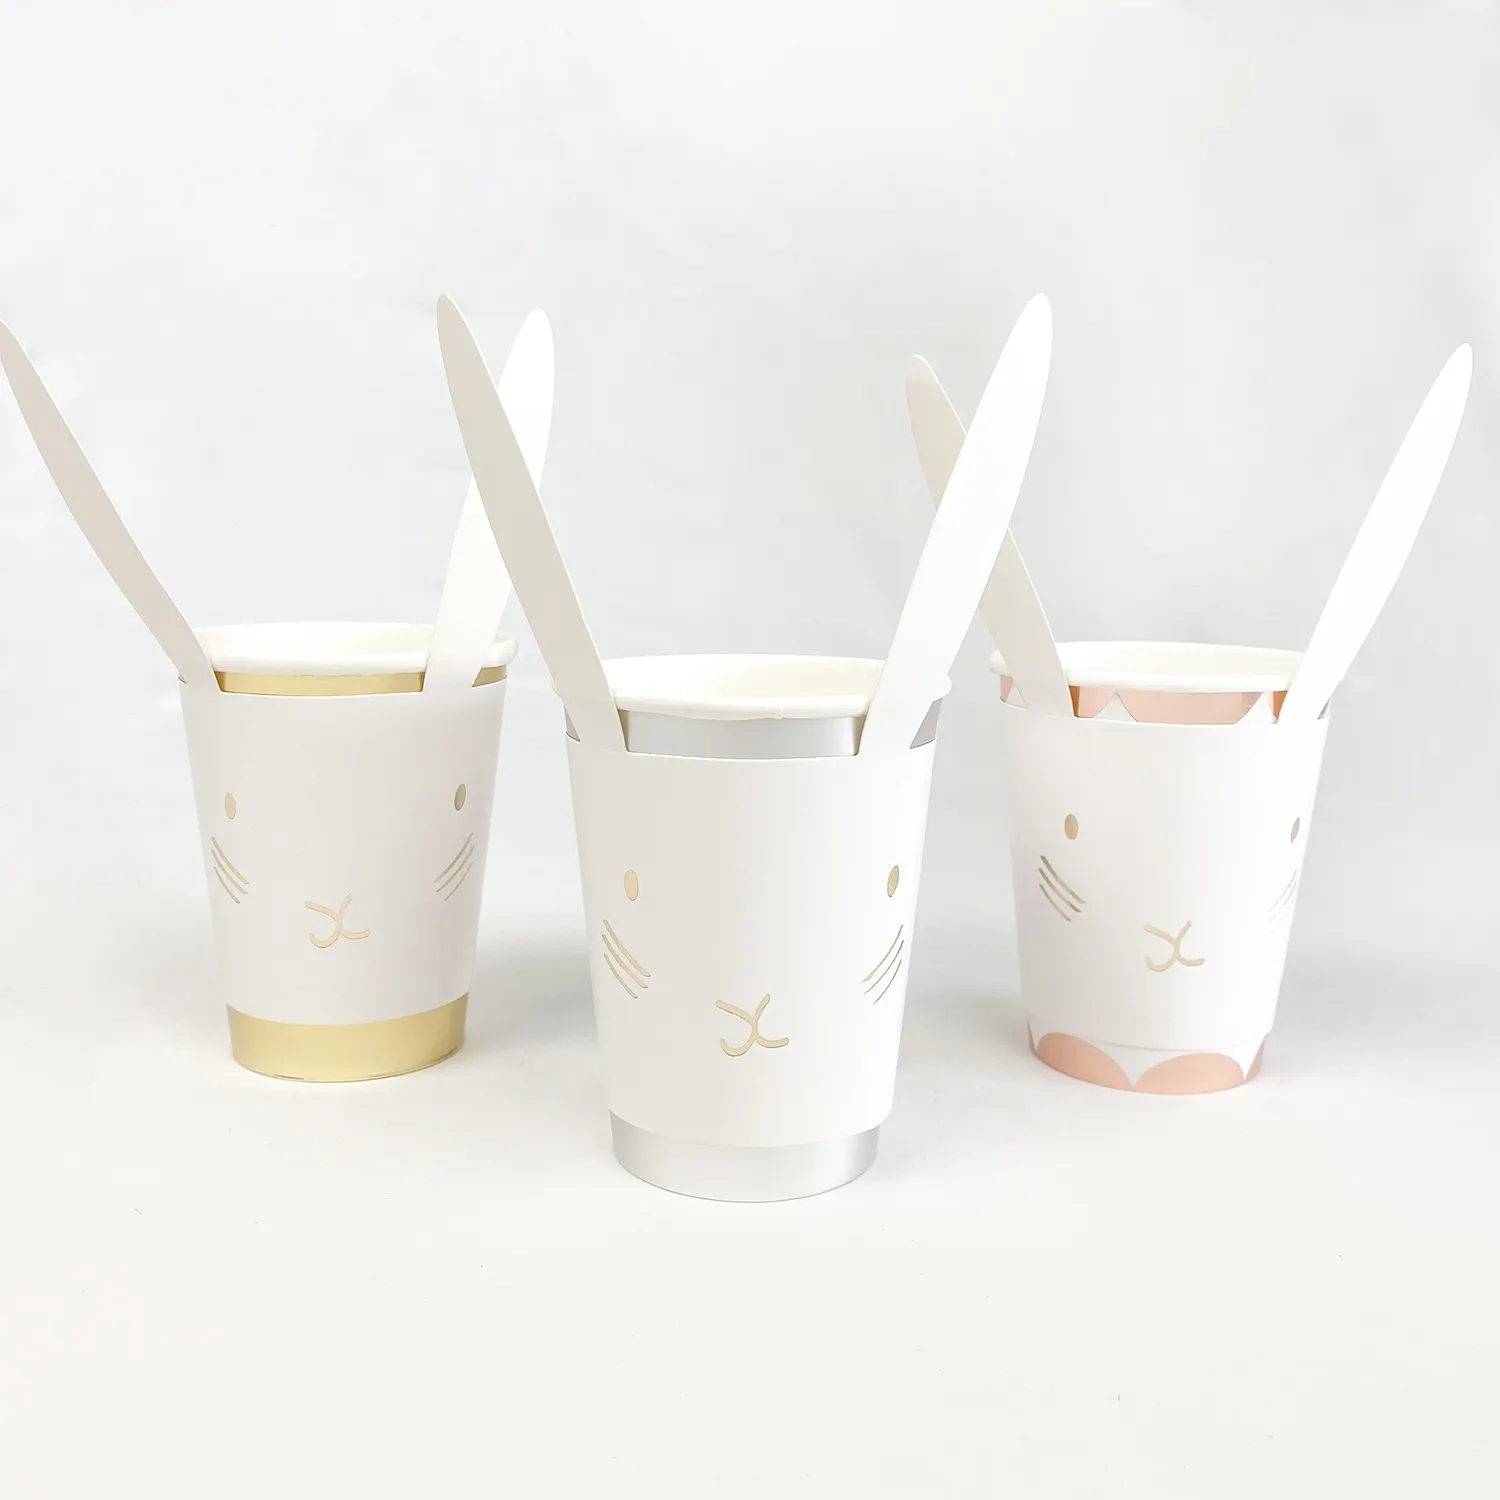 Custom Disposable Pastel Bunny Sleeves with Shiny Gold Foil Adorable Rabbit Sleeves for Easter Eco-friendly for Parties